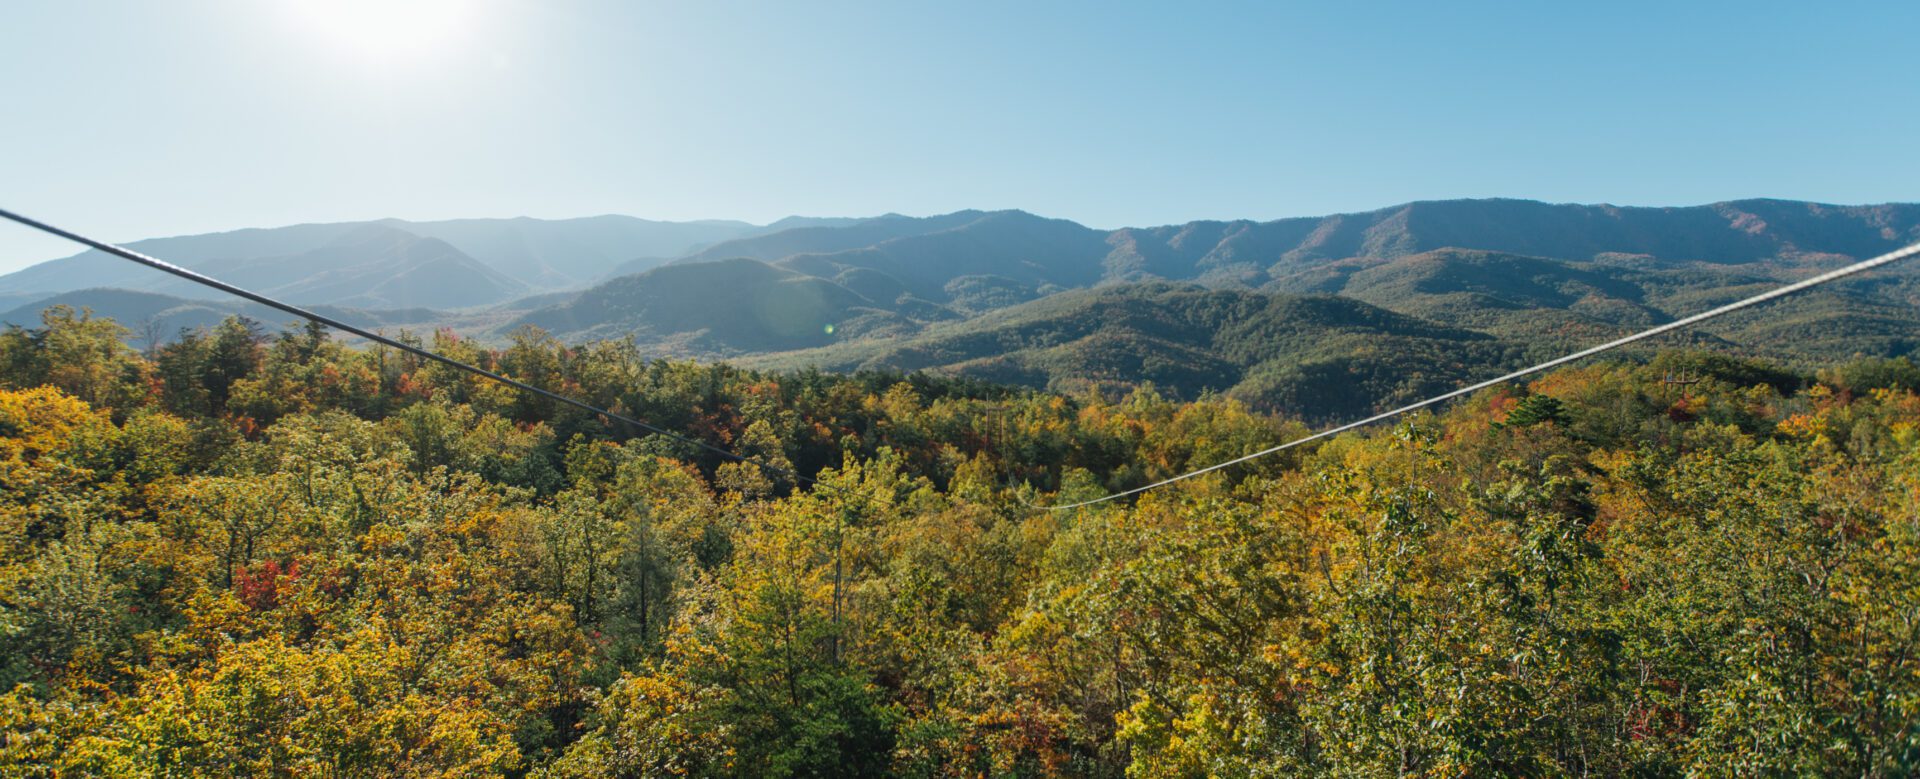 What to Expect on Our Mountaintop Zipline Tour in the Smoky Mountains